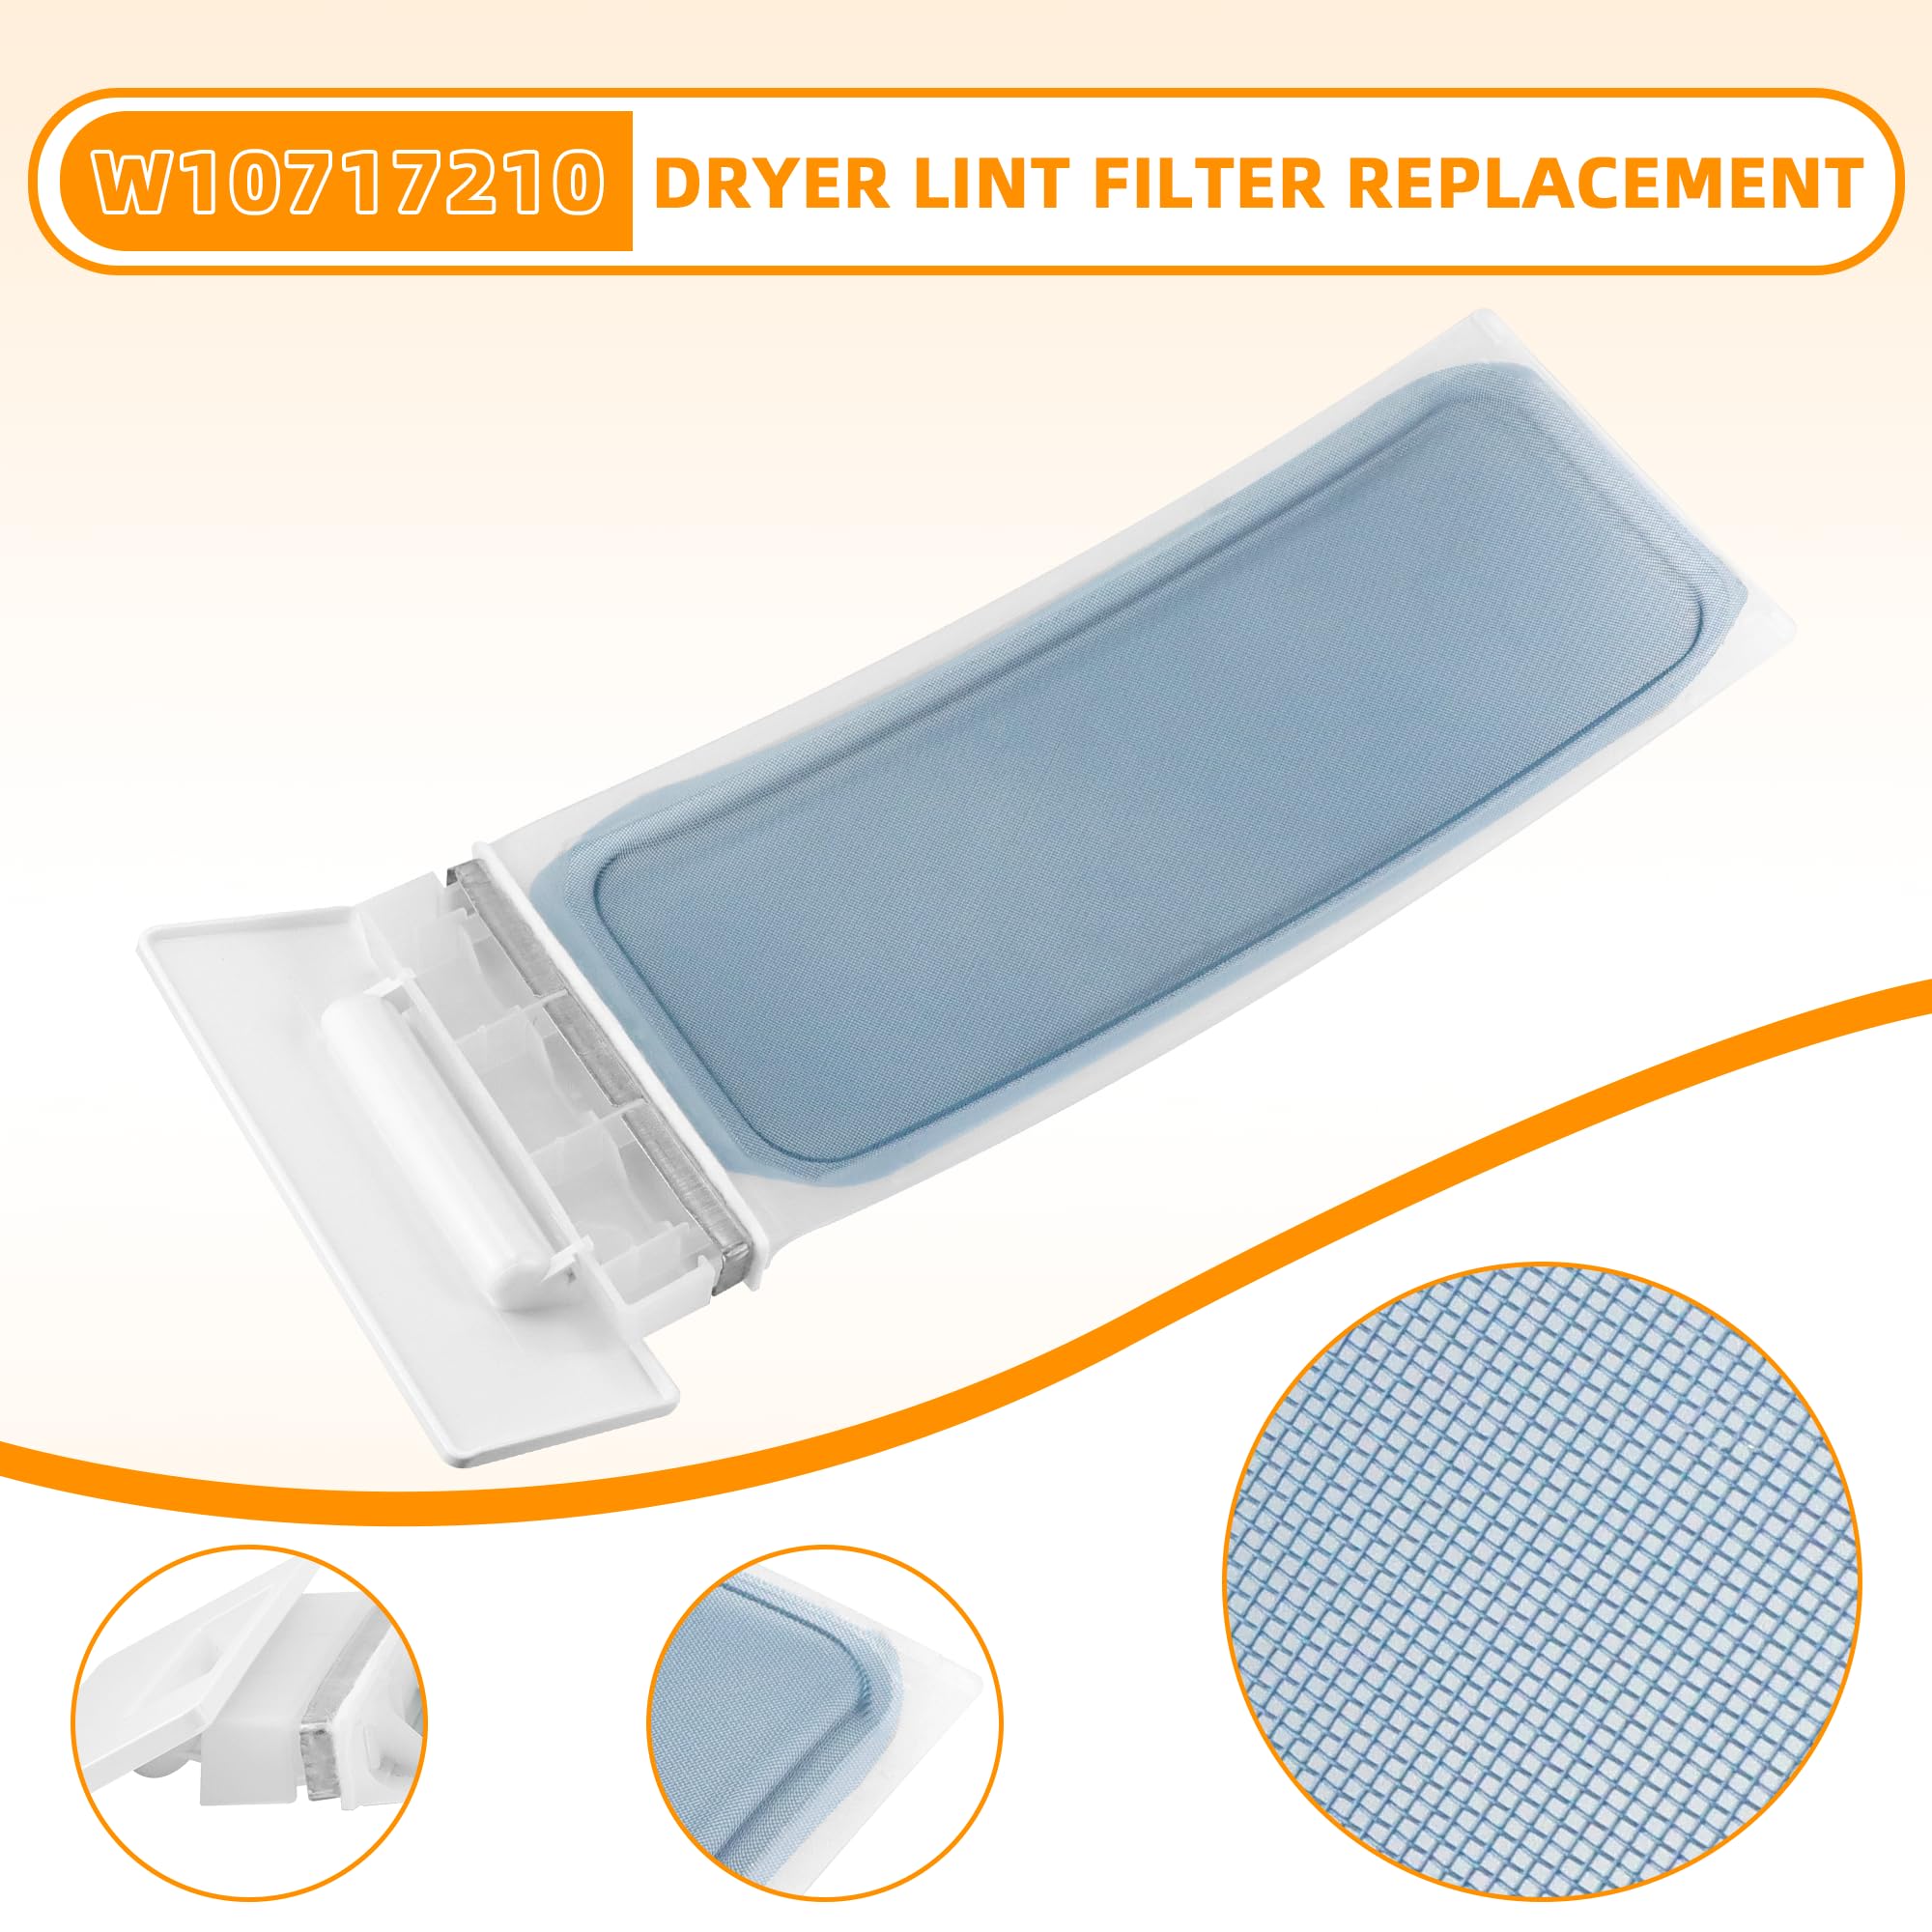 AMI PARTS W10717210 W11522758 Dryer Lint Filter Case Screen Replacement Parts Fit for whirl-pool, ken-more - Repalce 348846, 348851, 689465, 8557857, 8557882, 8558463, 8559787, 8565972, etc